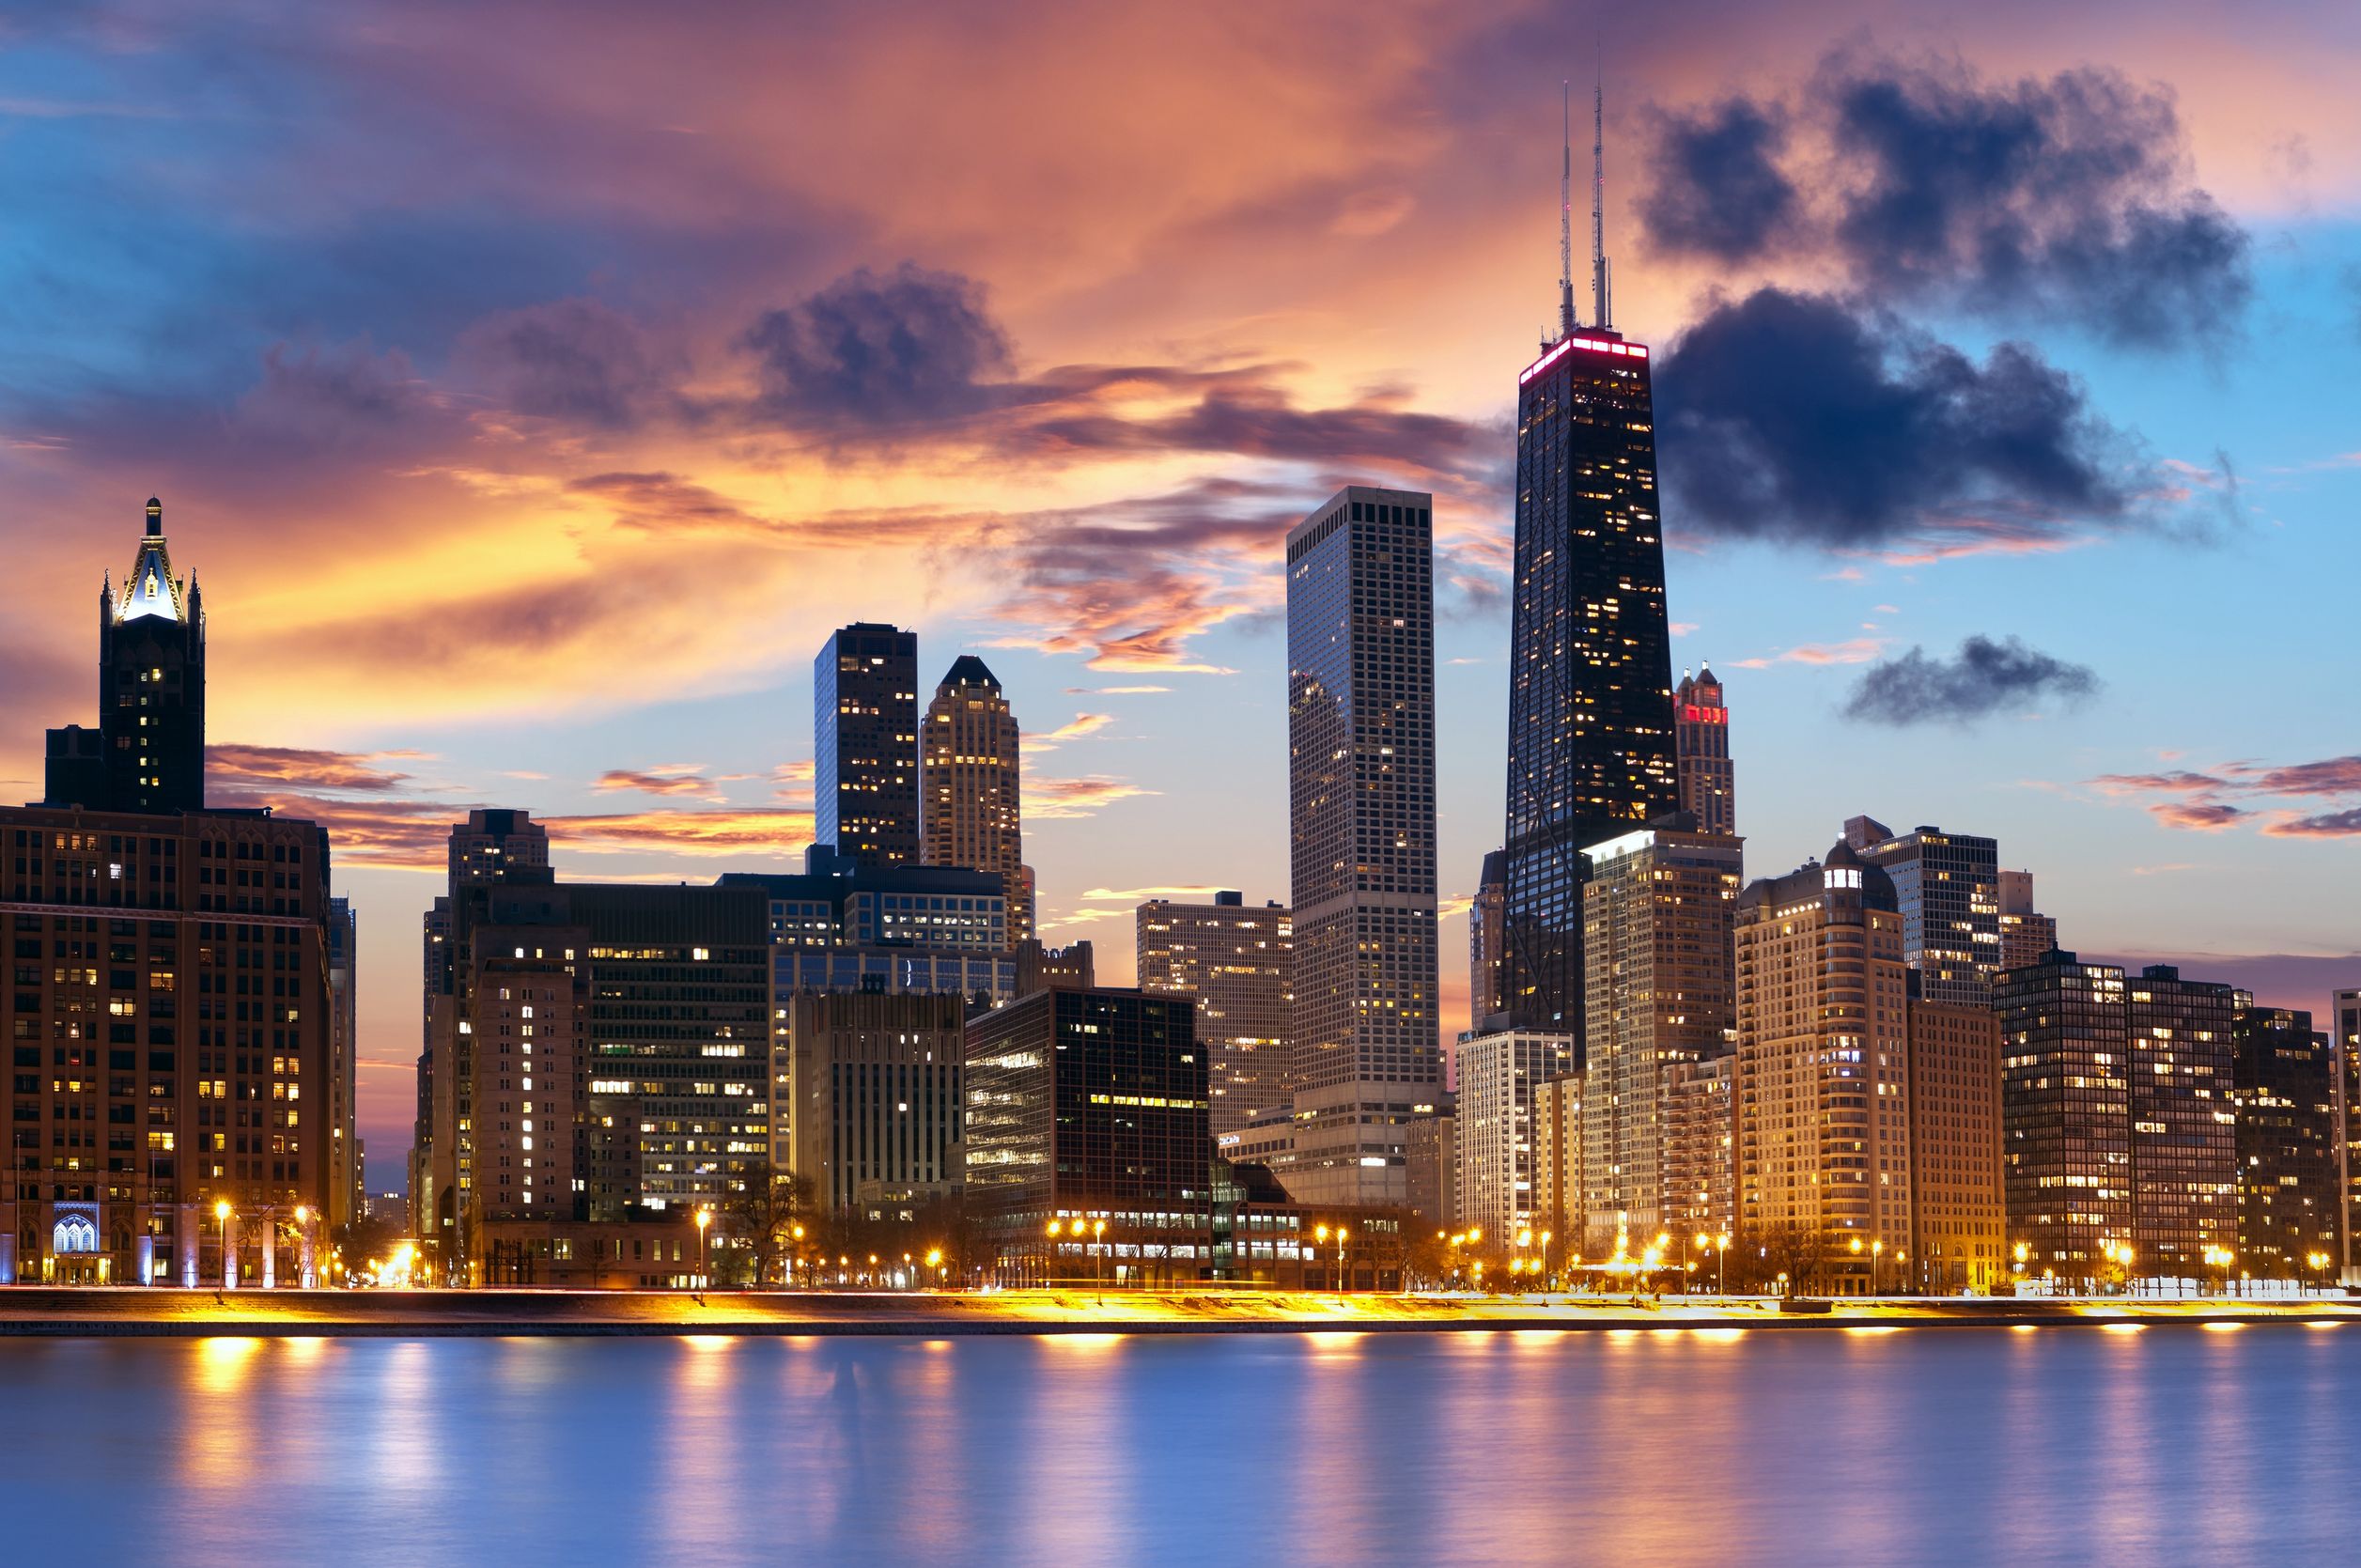 Chicago is the Top Tourist-Loving City in the U.S.